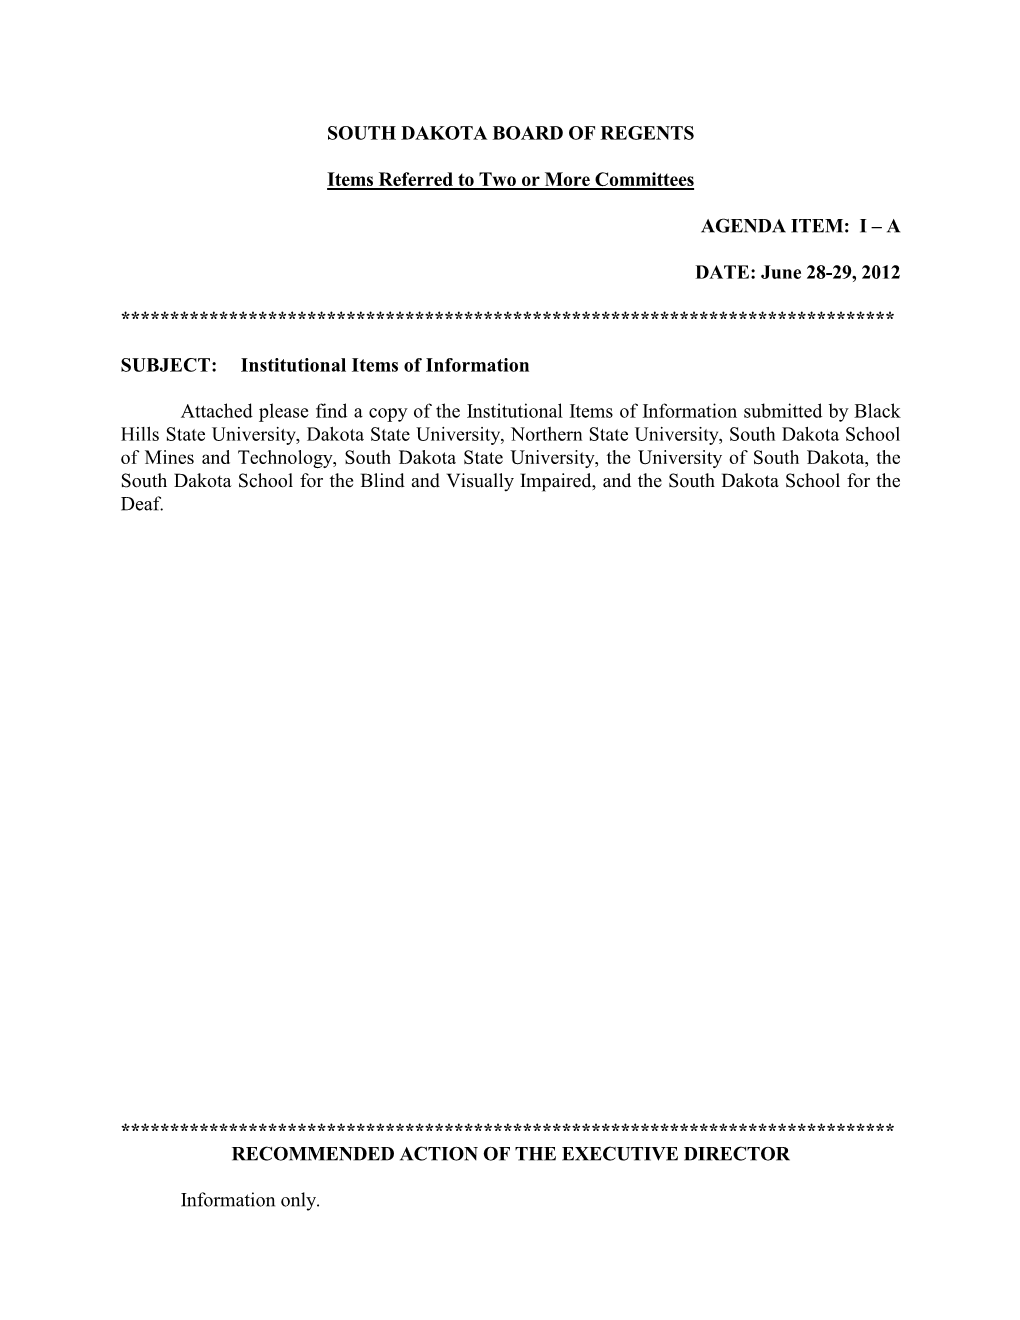 SOUTH DAKOTA BOARD of REGENTS Items Referred to Two Or More Committees AGENDA ITEM: I – a DATE: June 28-29, 2012 ************